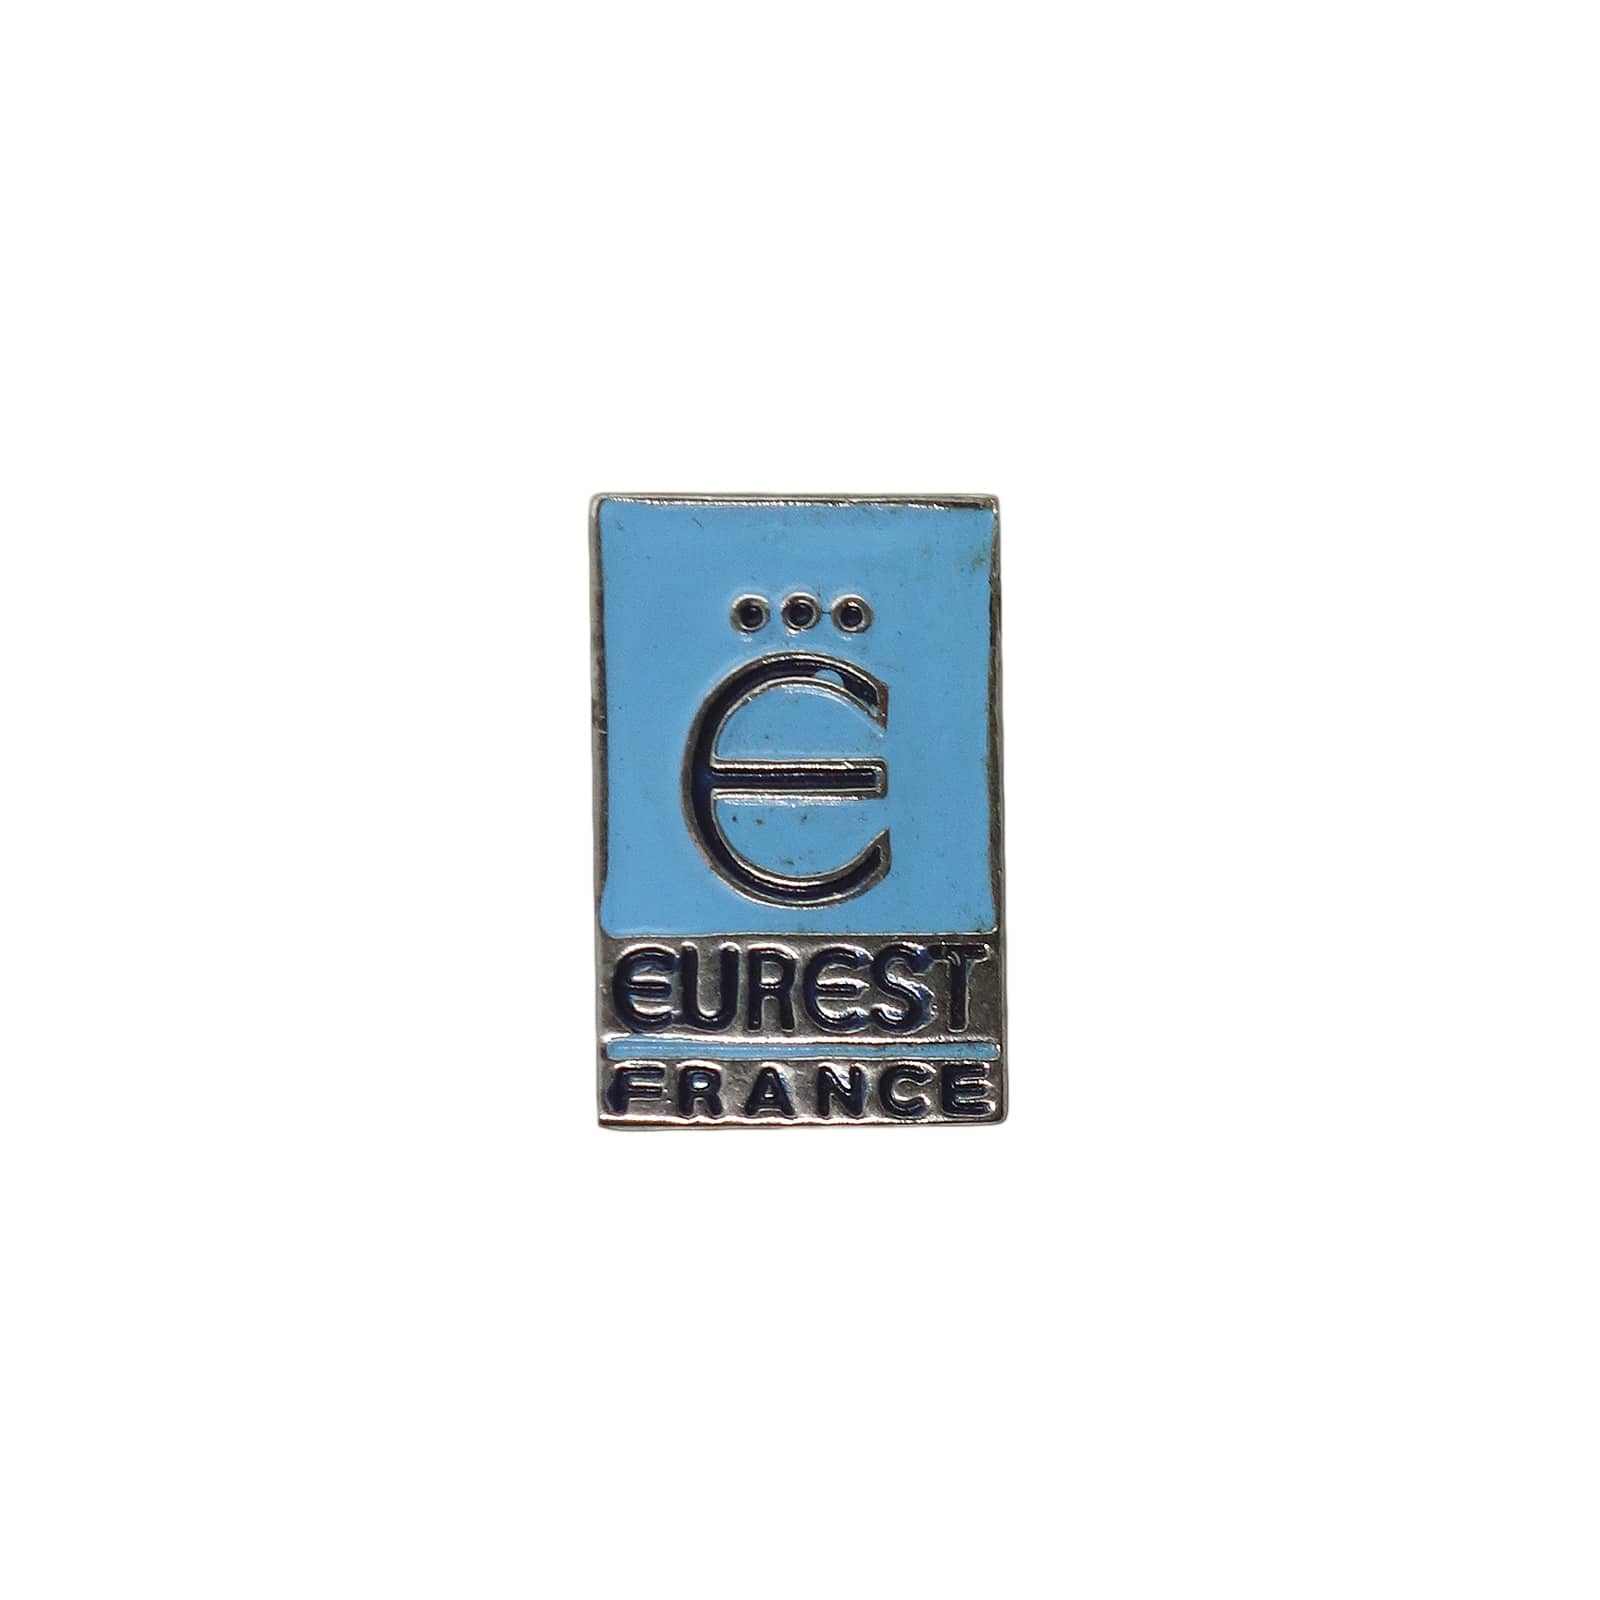 EUREST FRANCE ピンズ 留め具付き